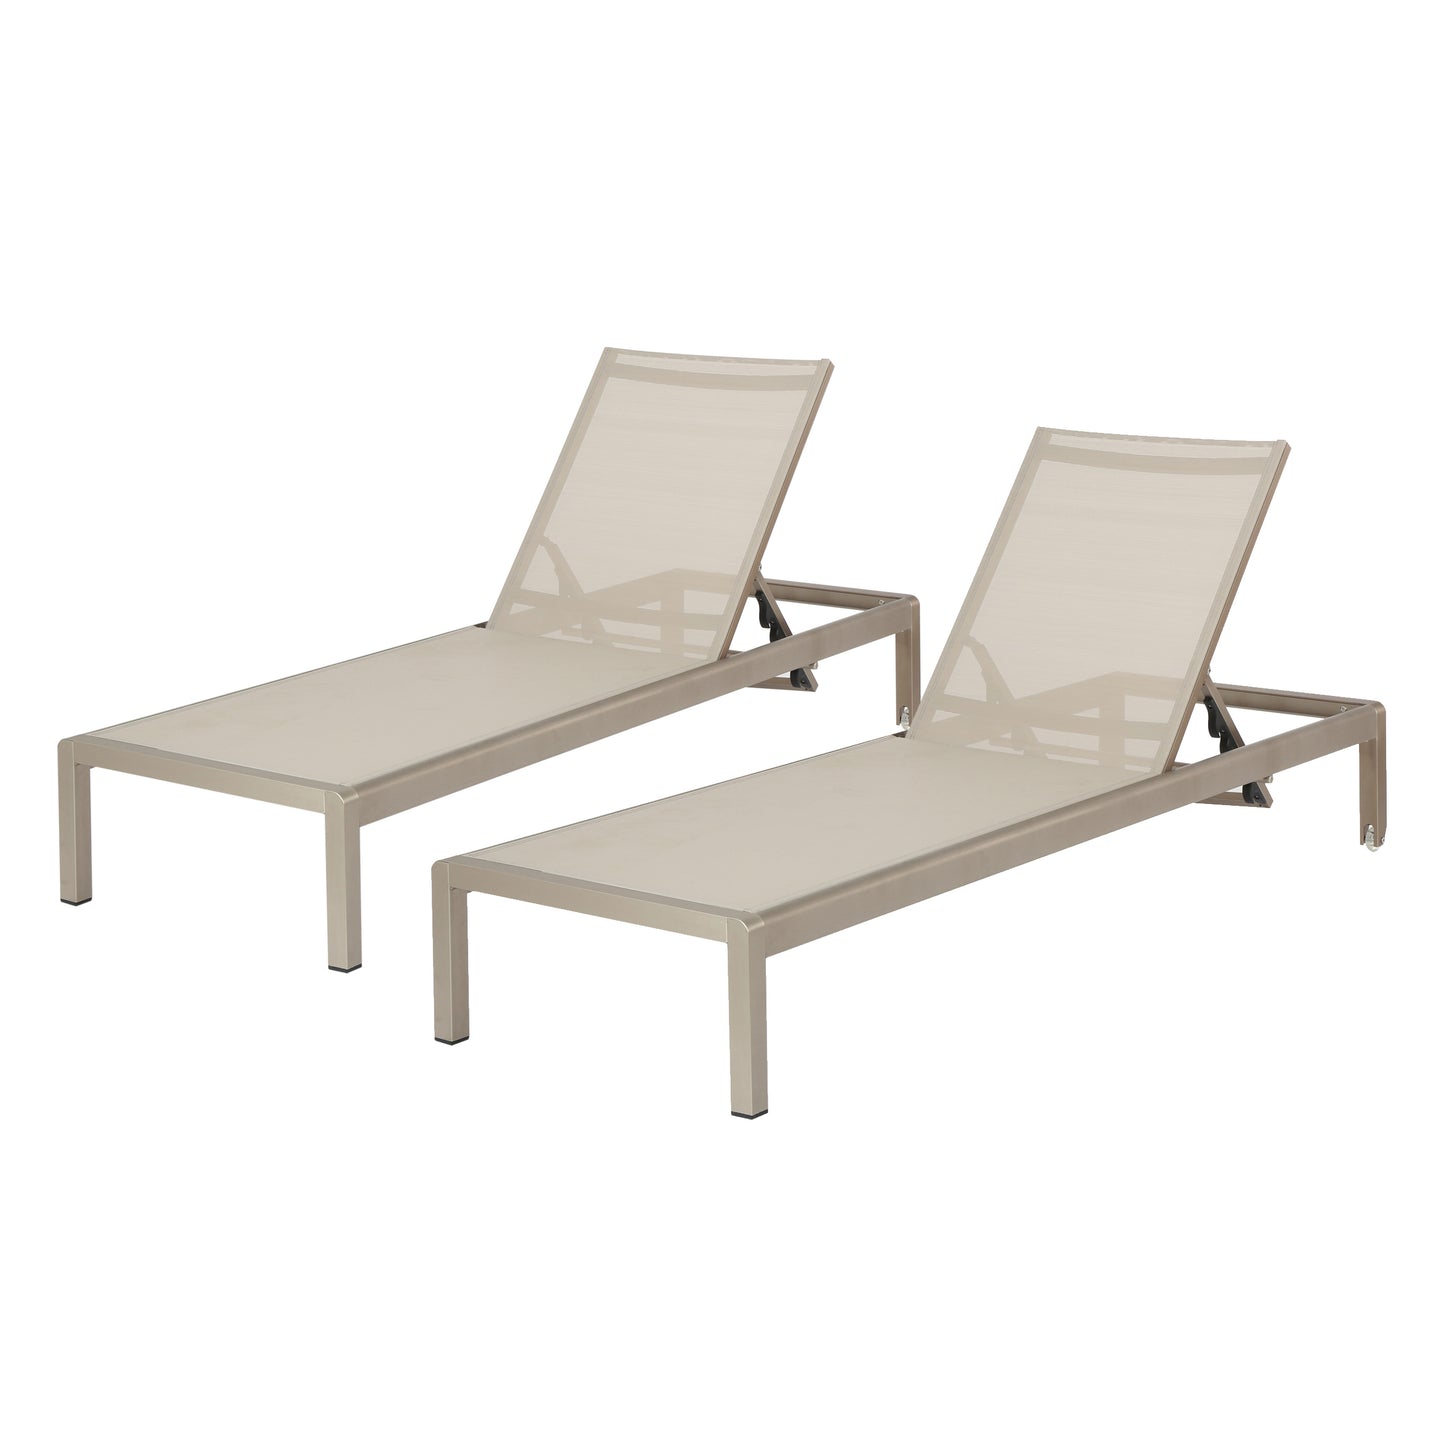 Holborn Outdoor Modern Gray Mesh Chaise Lounge with Wheels (Set of 2)